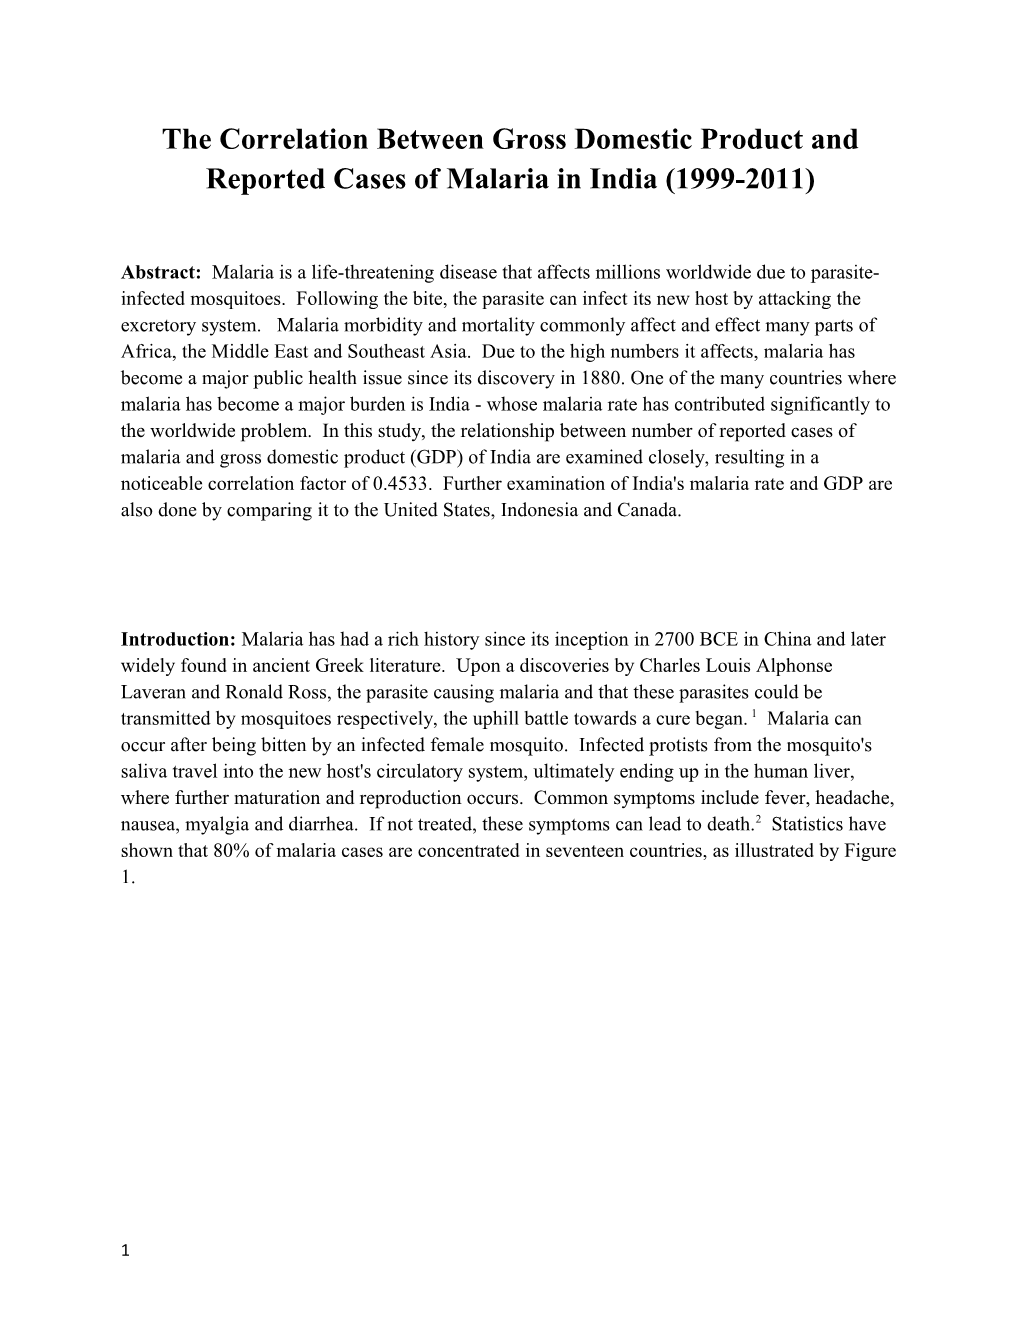 The Correlation Between Gross Domestic Product and Reported Cases of Malaria in India